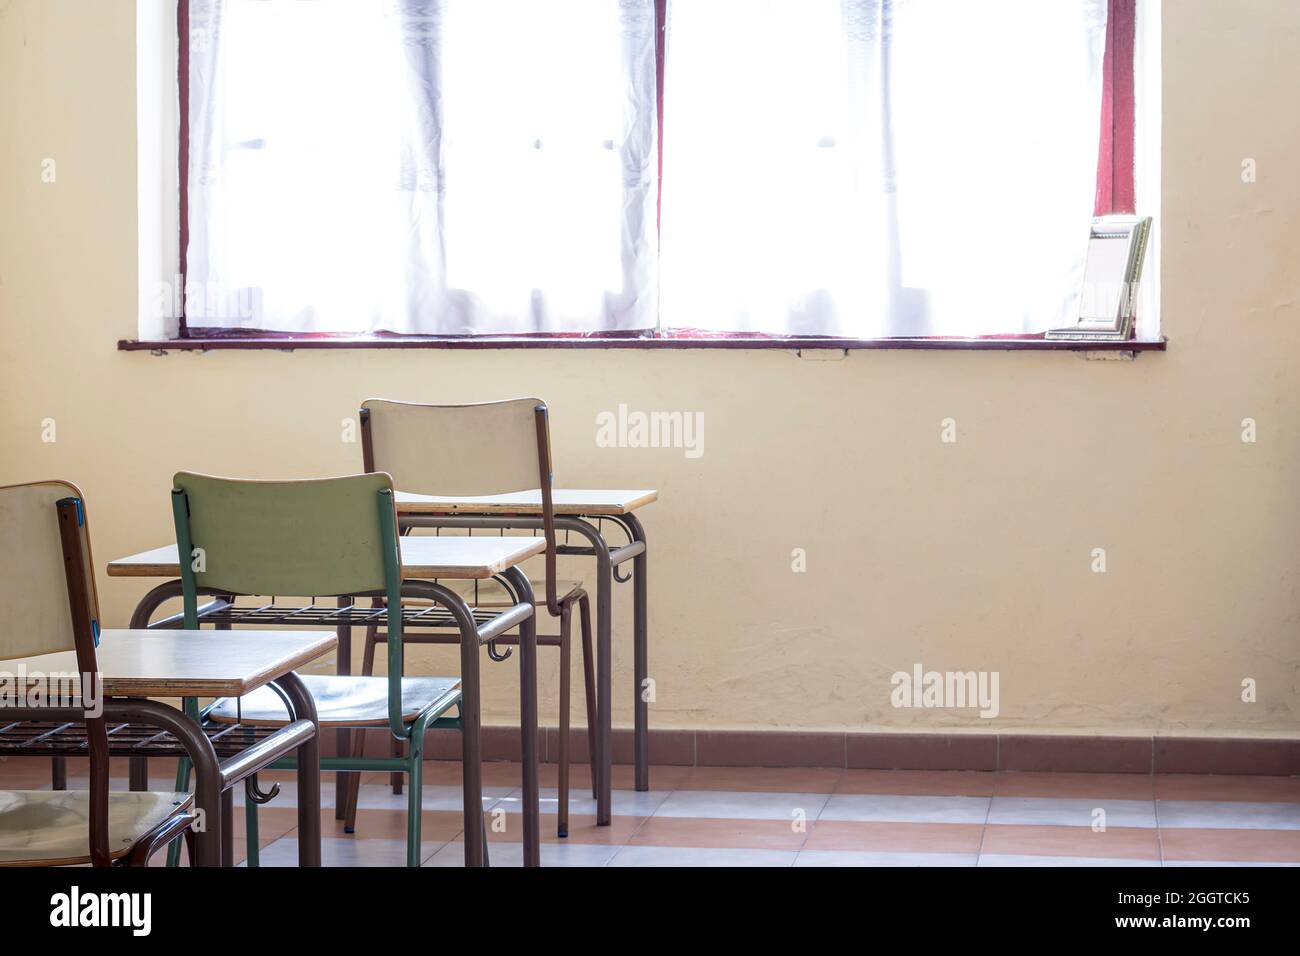 Photograph of some desks and chairs in a nursery school.The photo is taken in horizontal format. Stock Photo